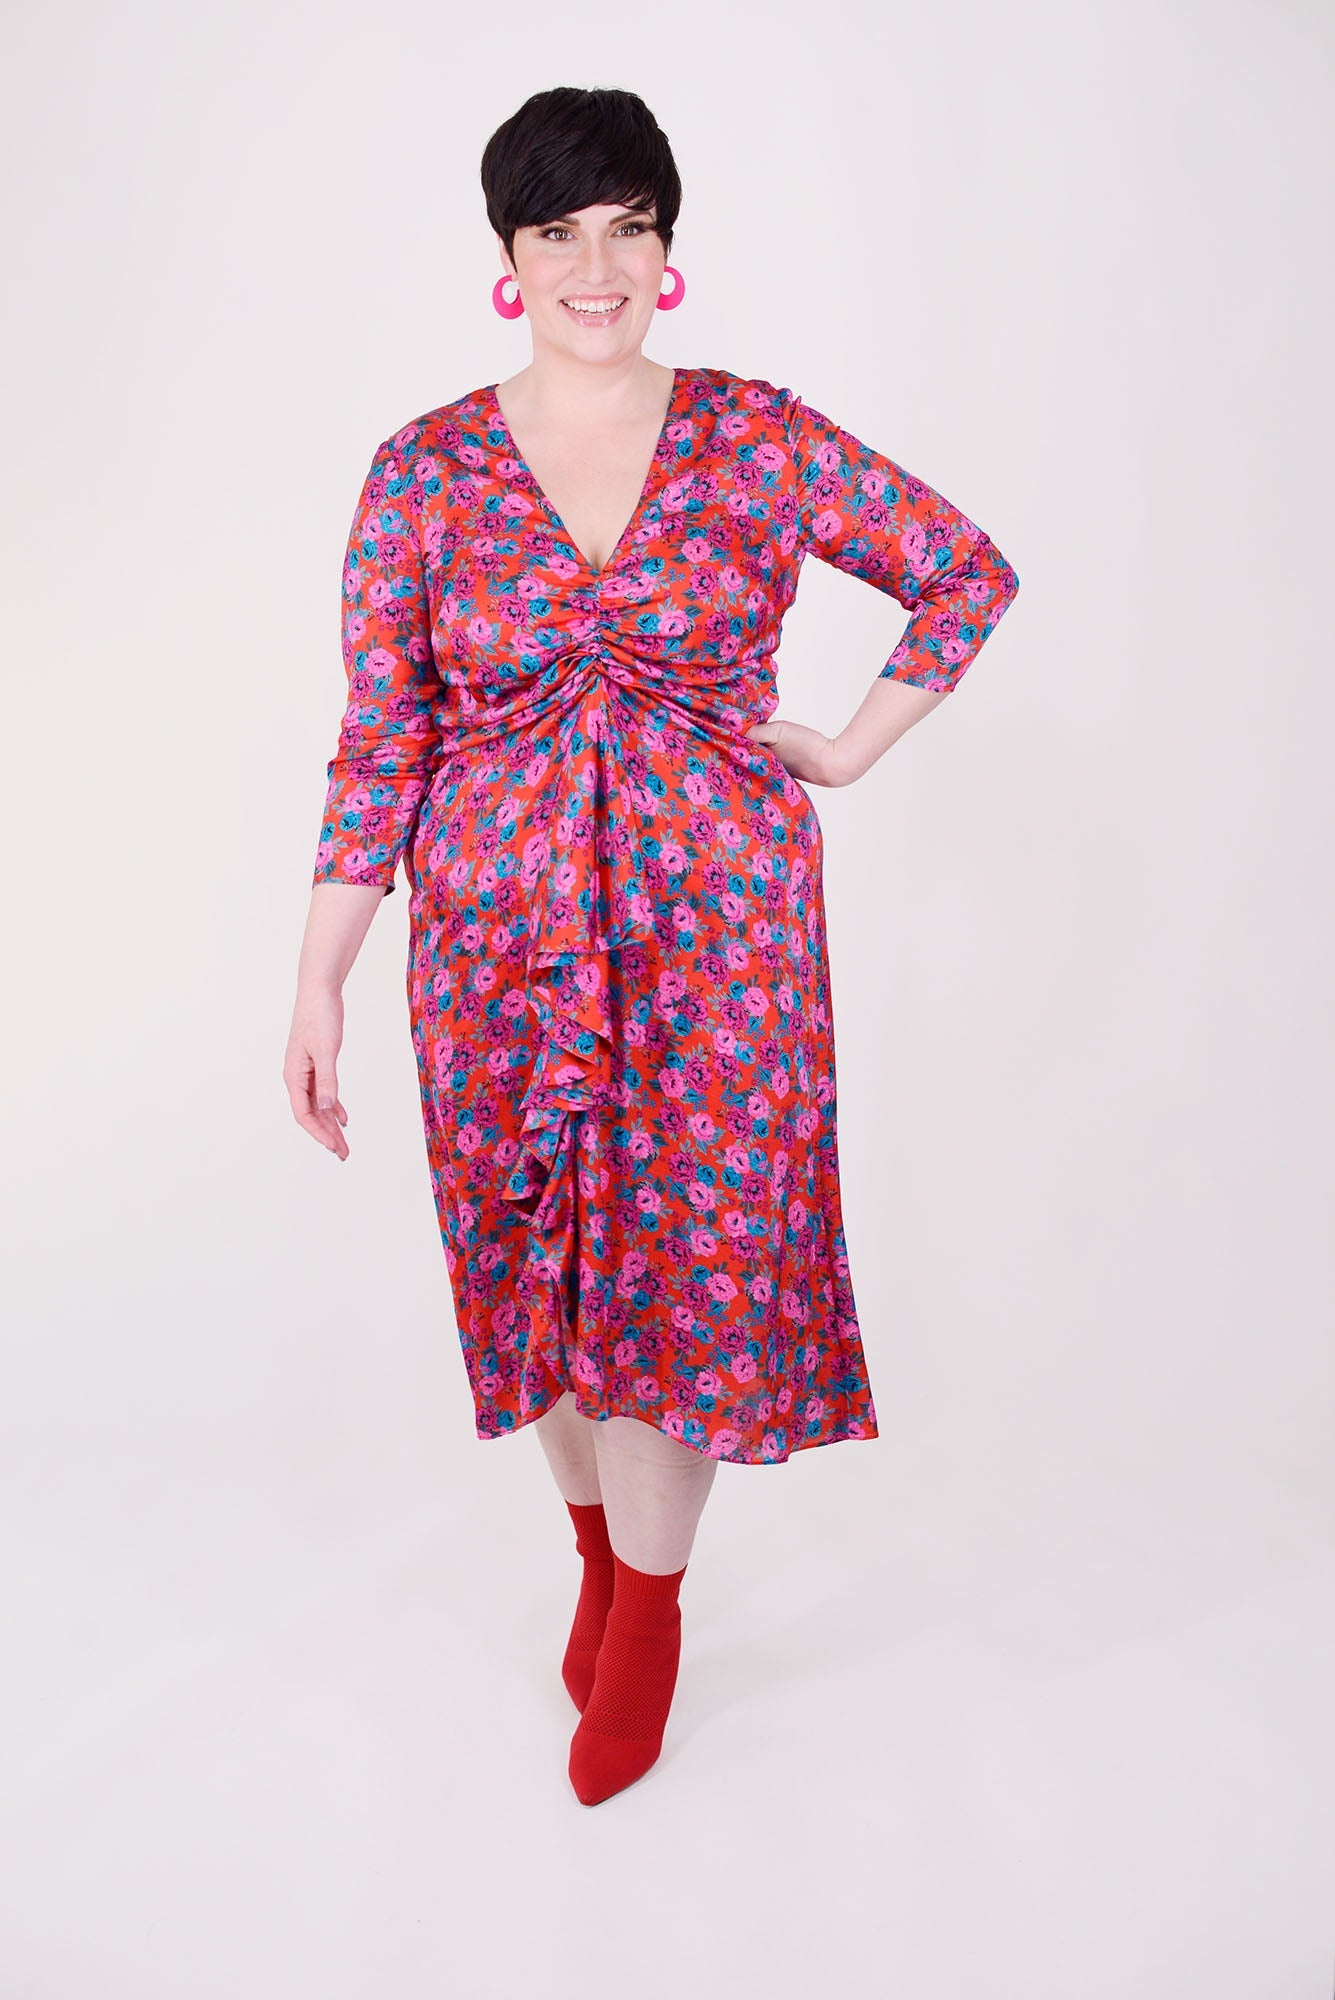 Mayes NYC Winnie RNR Dress in Red colored Mini Rose Print worn by model Max